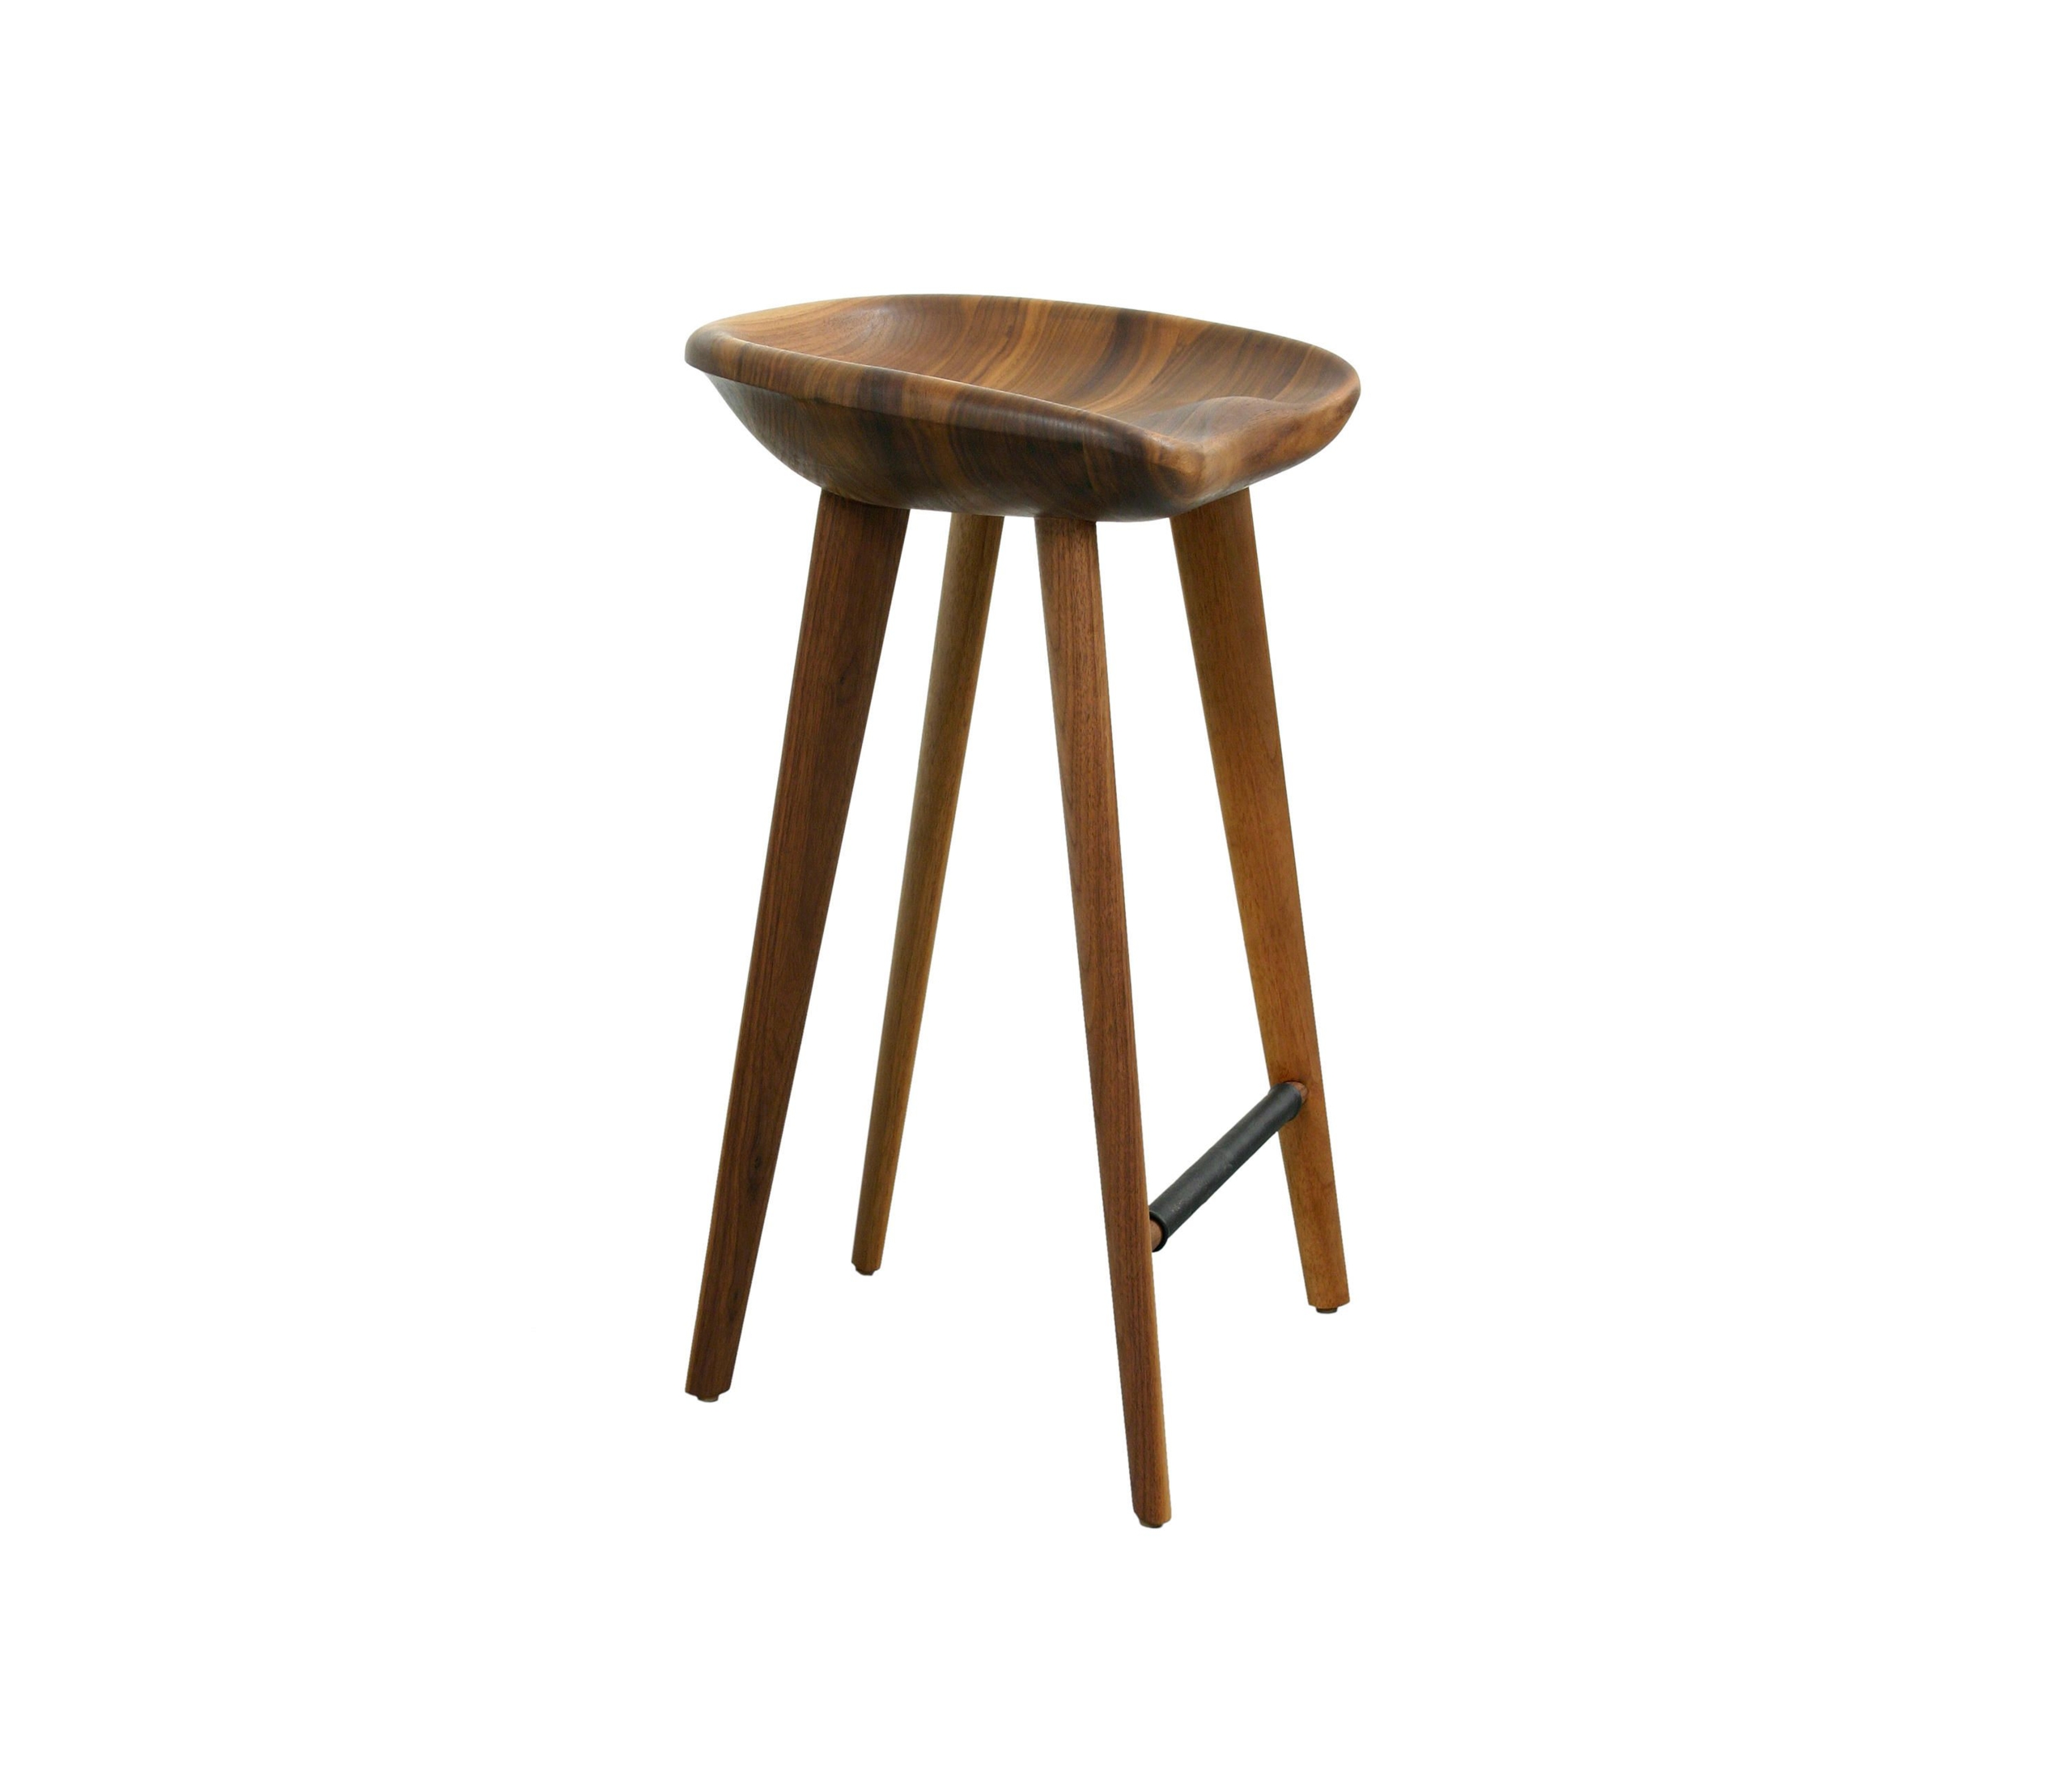 Wooden Tractor Seat Bar Stools Visualhunt, Wooden Tractor Seat Bar Stools